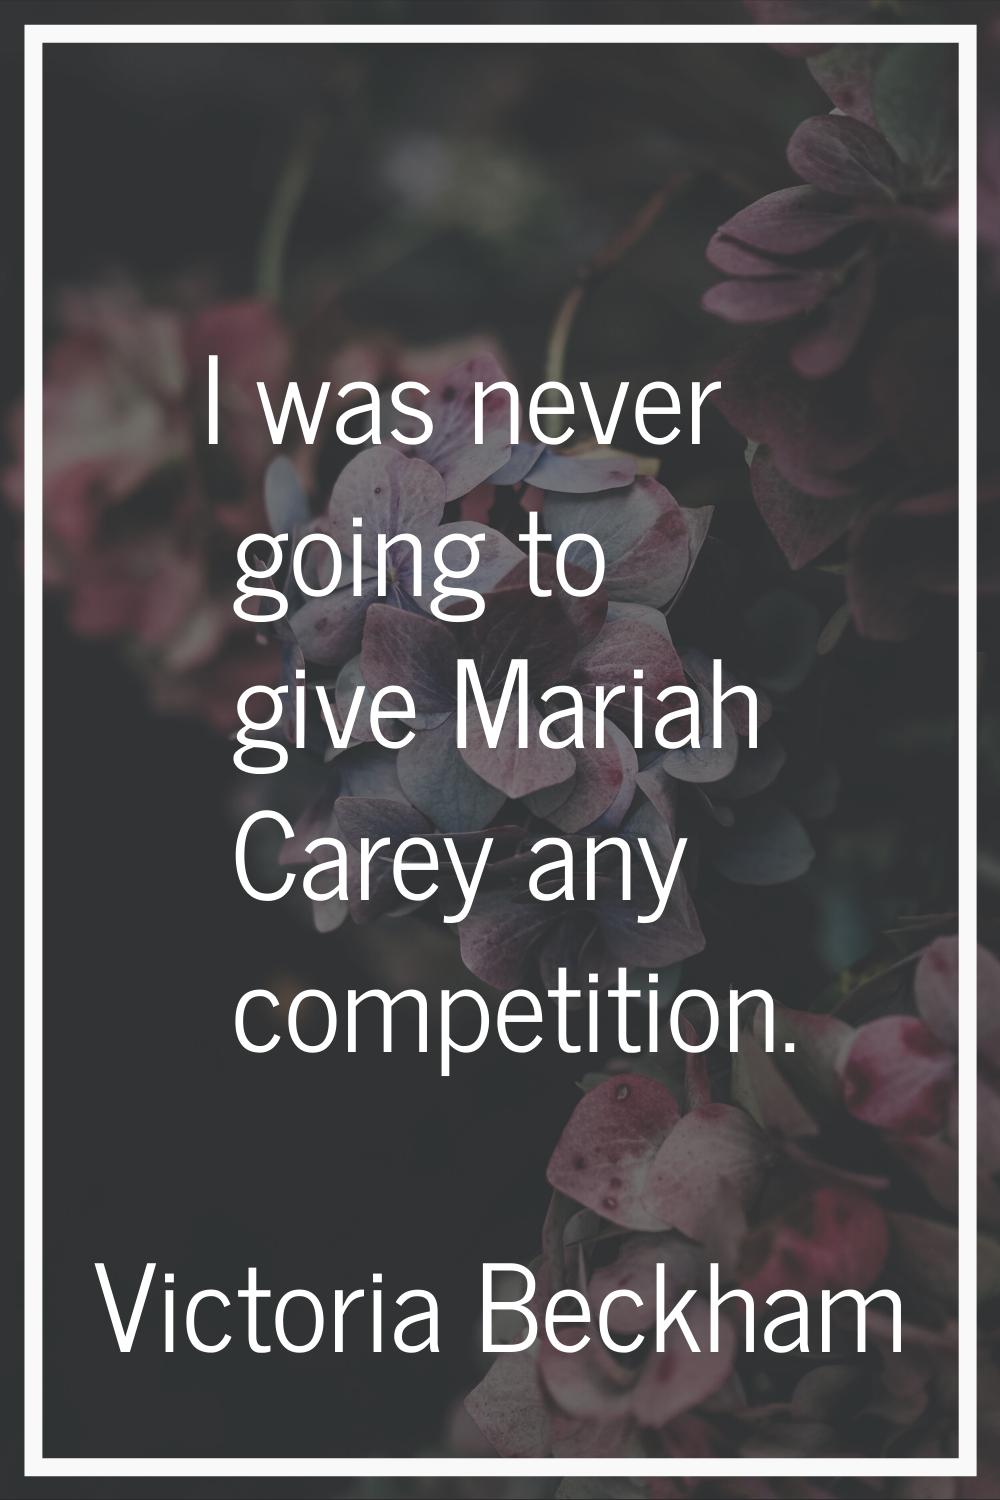 I was never going to give Mariah Carey any competition.